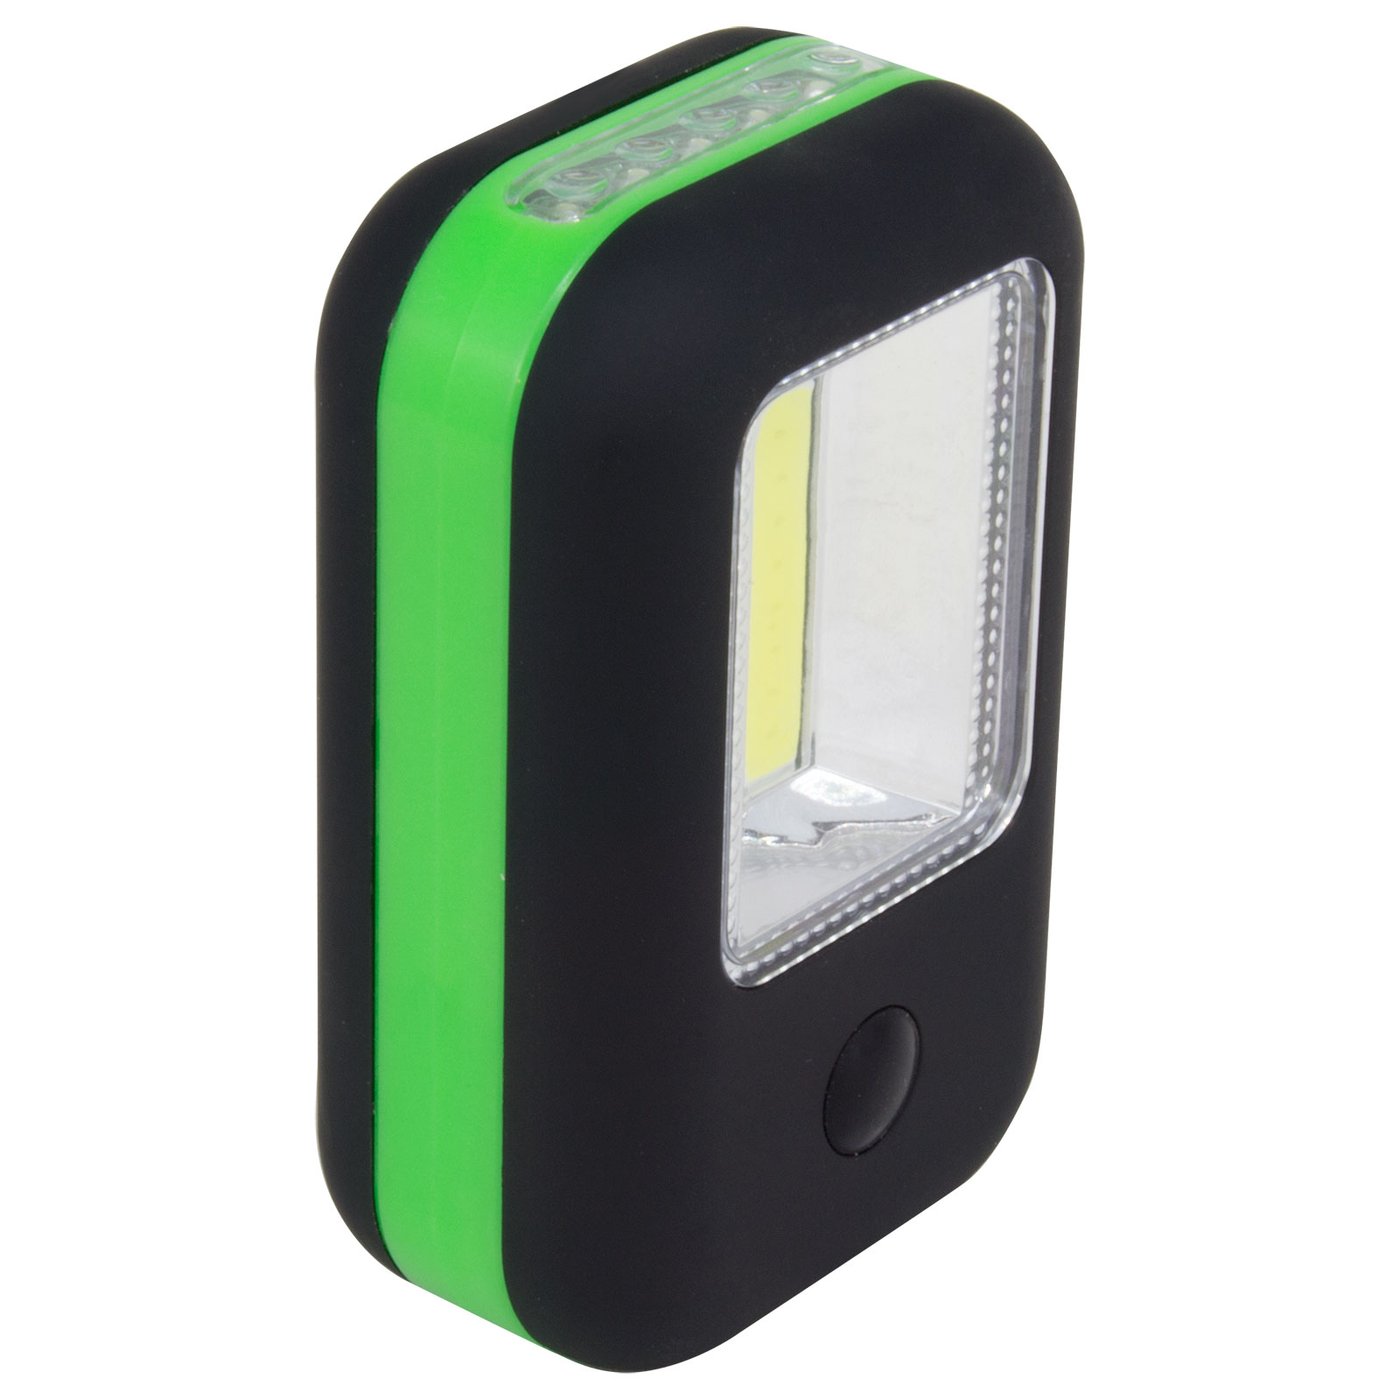 LitezAll | Ultra-Bright COB LED Compact Work Light With Magnetic Attachment & Adjustable Hook, Flashlight, LitezAll, Defiance Outdoor Gear Co.